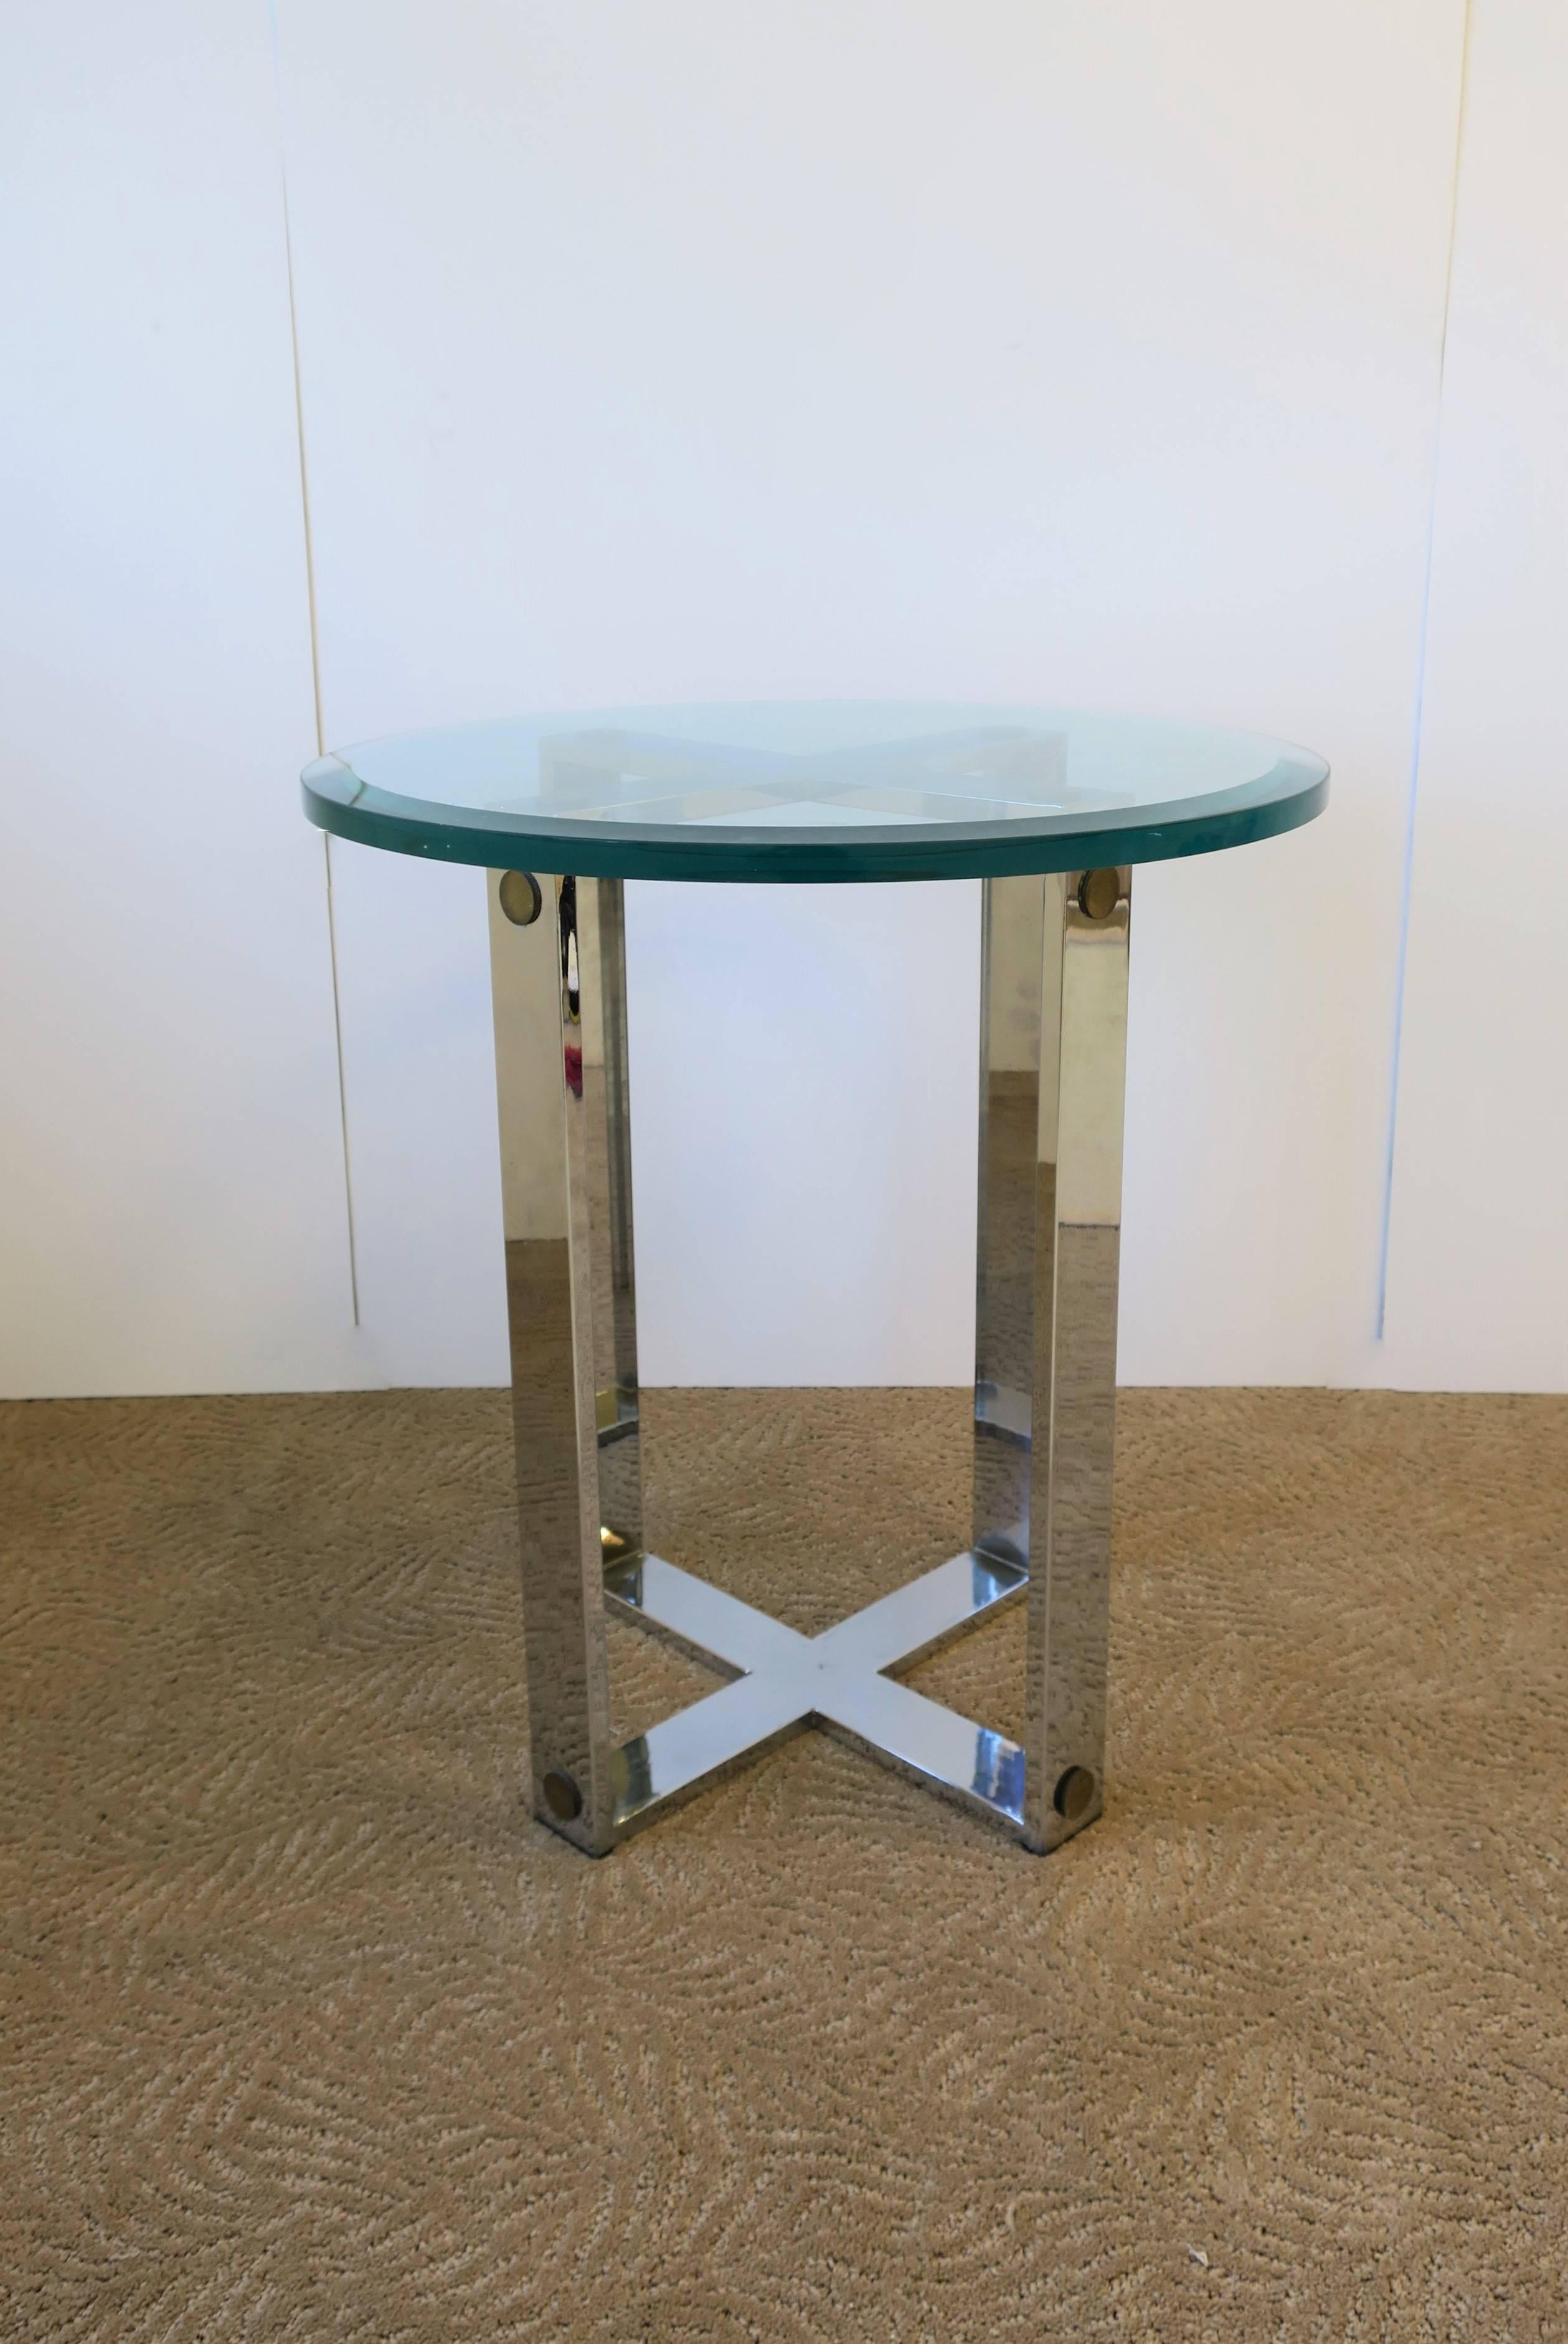 A vintage chrome, brass, and glass round end or side table in an Art Deco style, circa late 20th century. Substantial chrome frame/base with round geometric brass accents, finished with a significant round glass top measuring over 1 in. high at .63